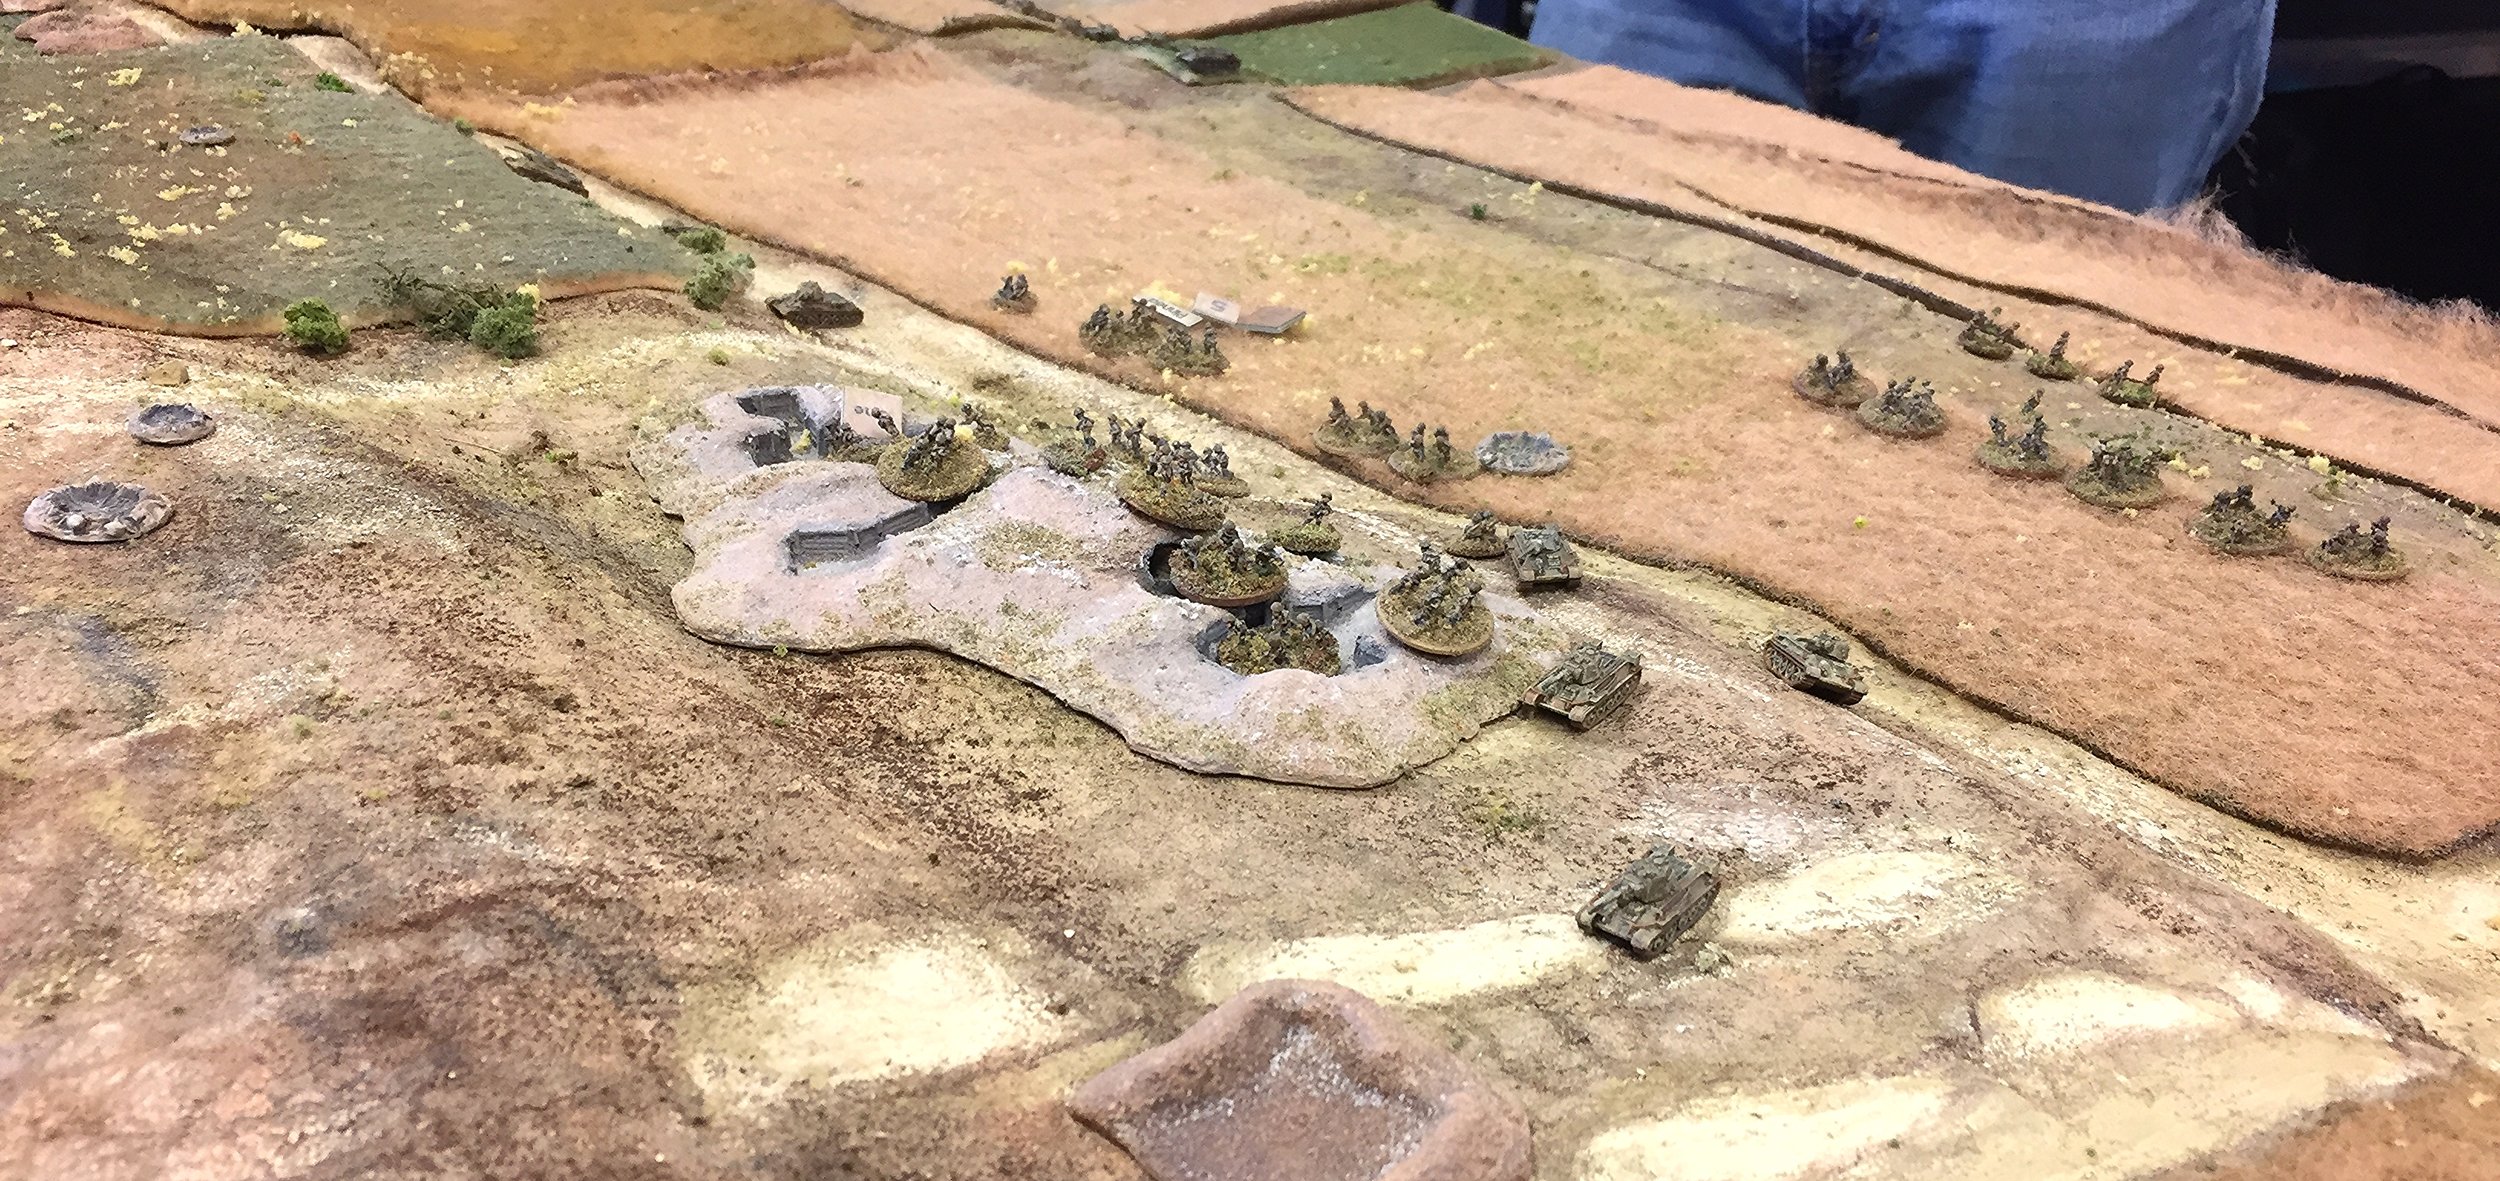 The Russians get into their Old Entrenchments